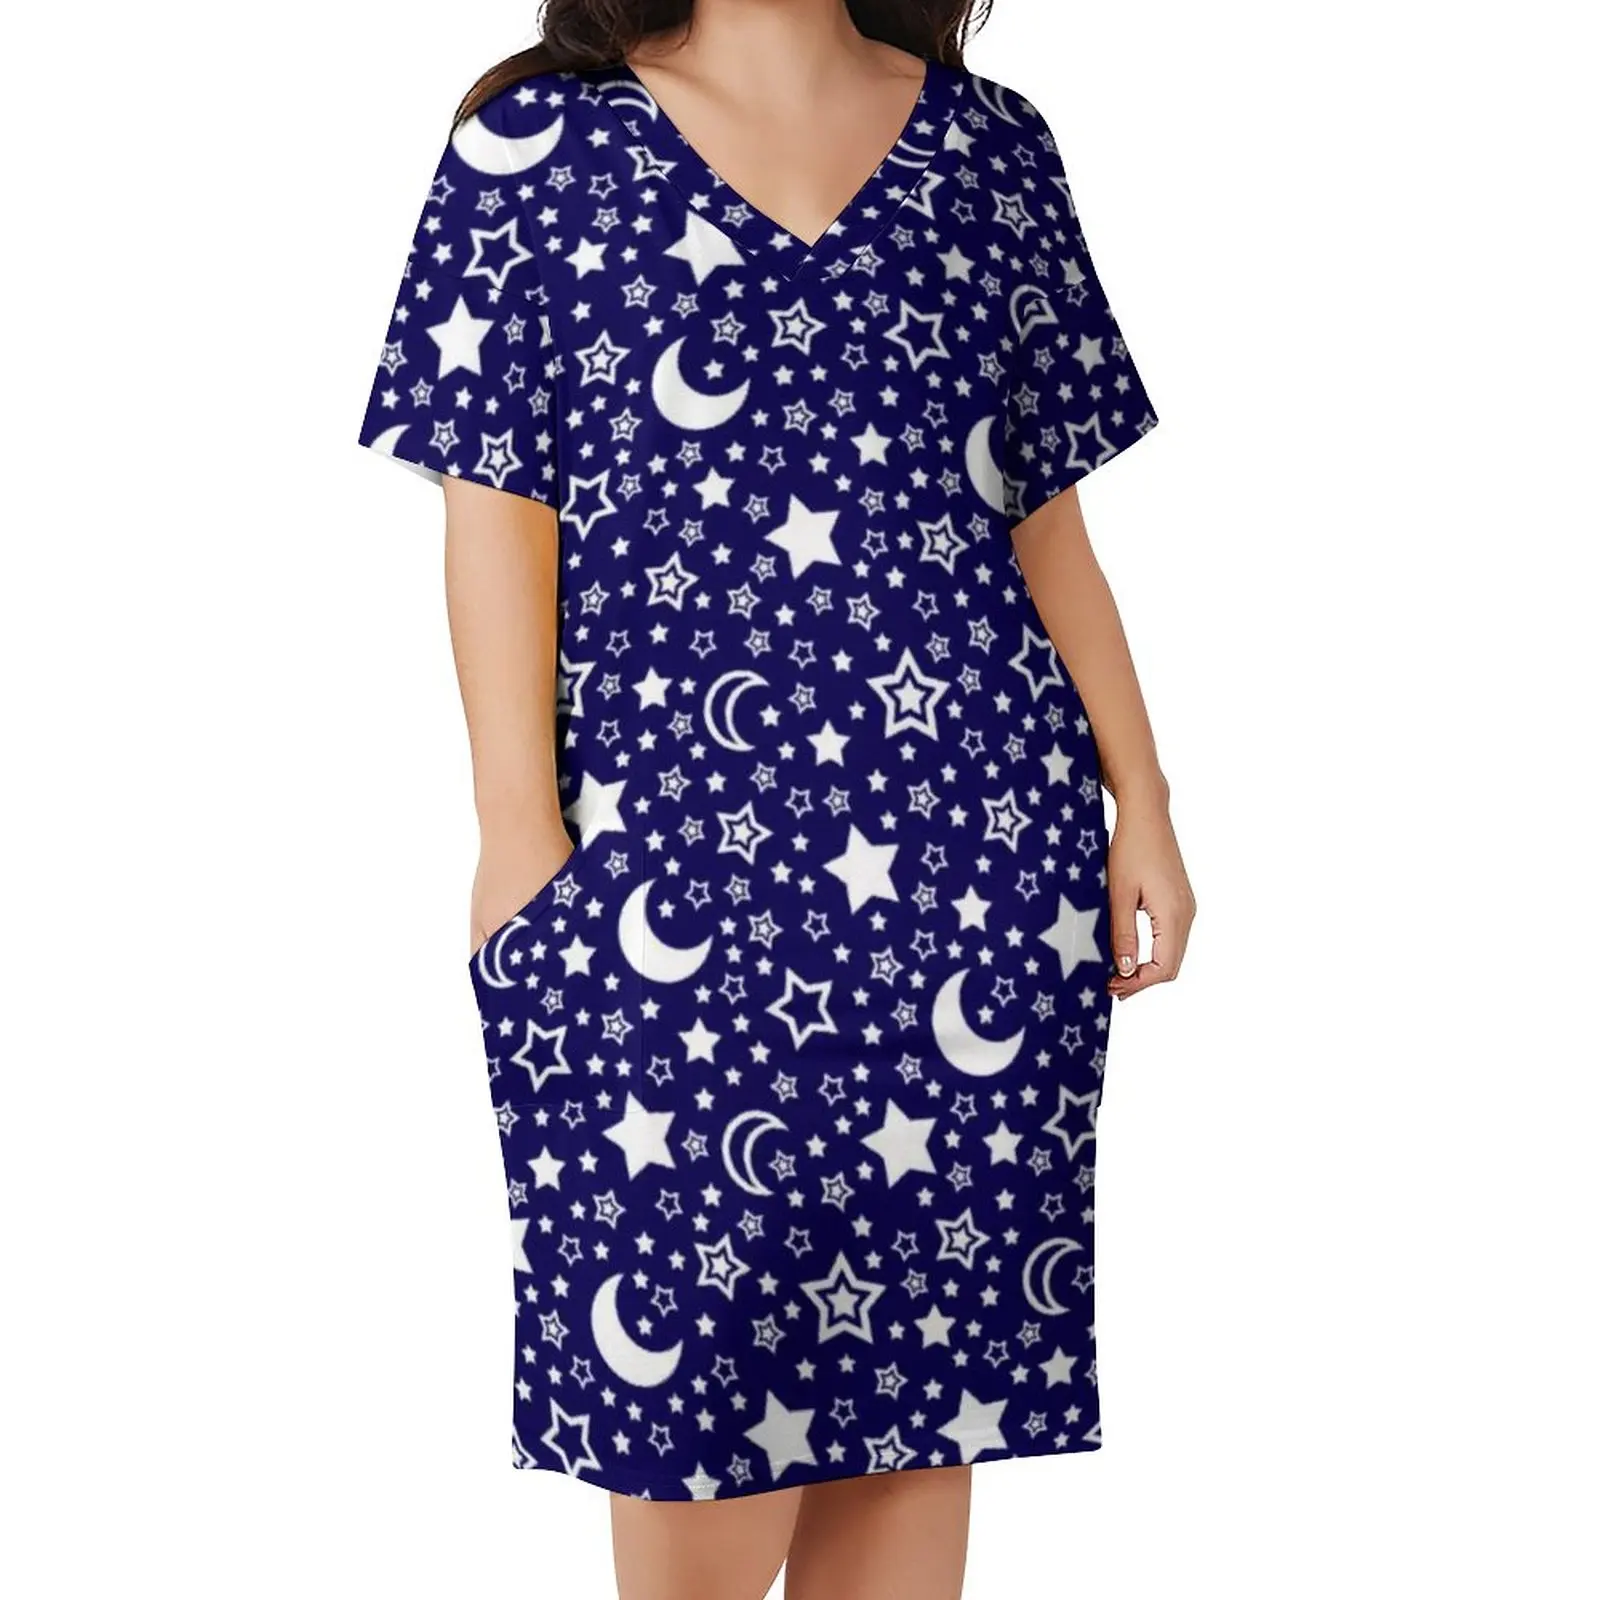 Night Sky Casual Dress Womens Moon and Stars Print Stylish Dresses Summer V Neck Aesthetic Graphic Dress Plus Size 3XL 4XL